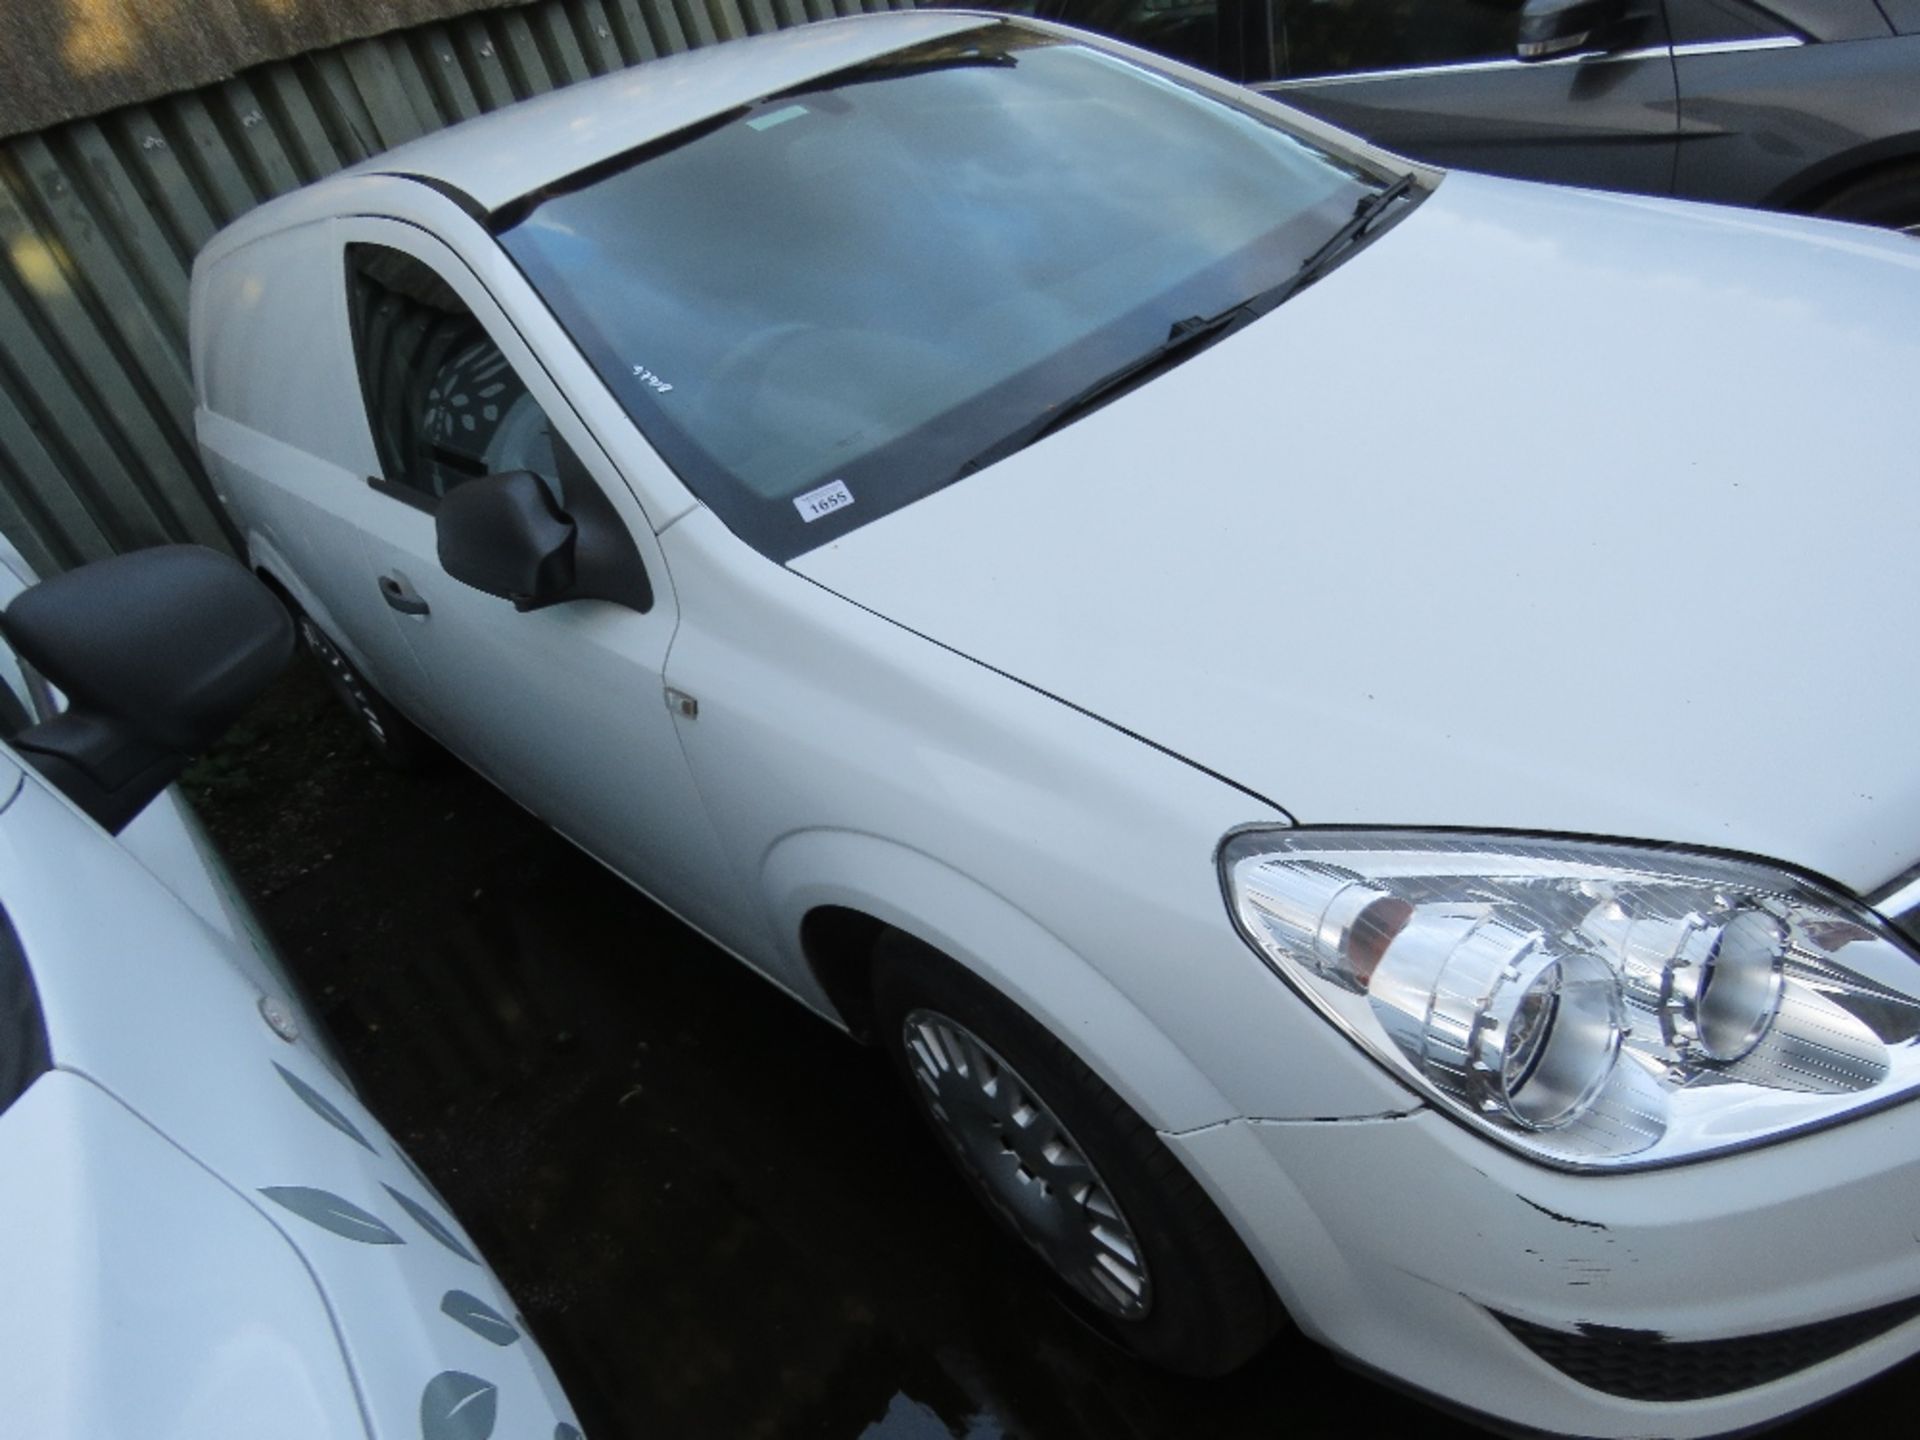 VAUXHALL ASTRA PANEL VAN REG:LM13 AHZ WITH V5 (TEST EXPIRED). THIS LOT IS SOLD UNDER THE AUCTION - Image 6 of 11